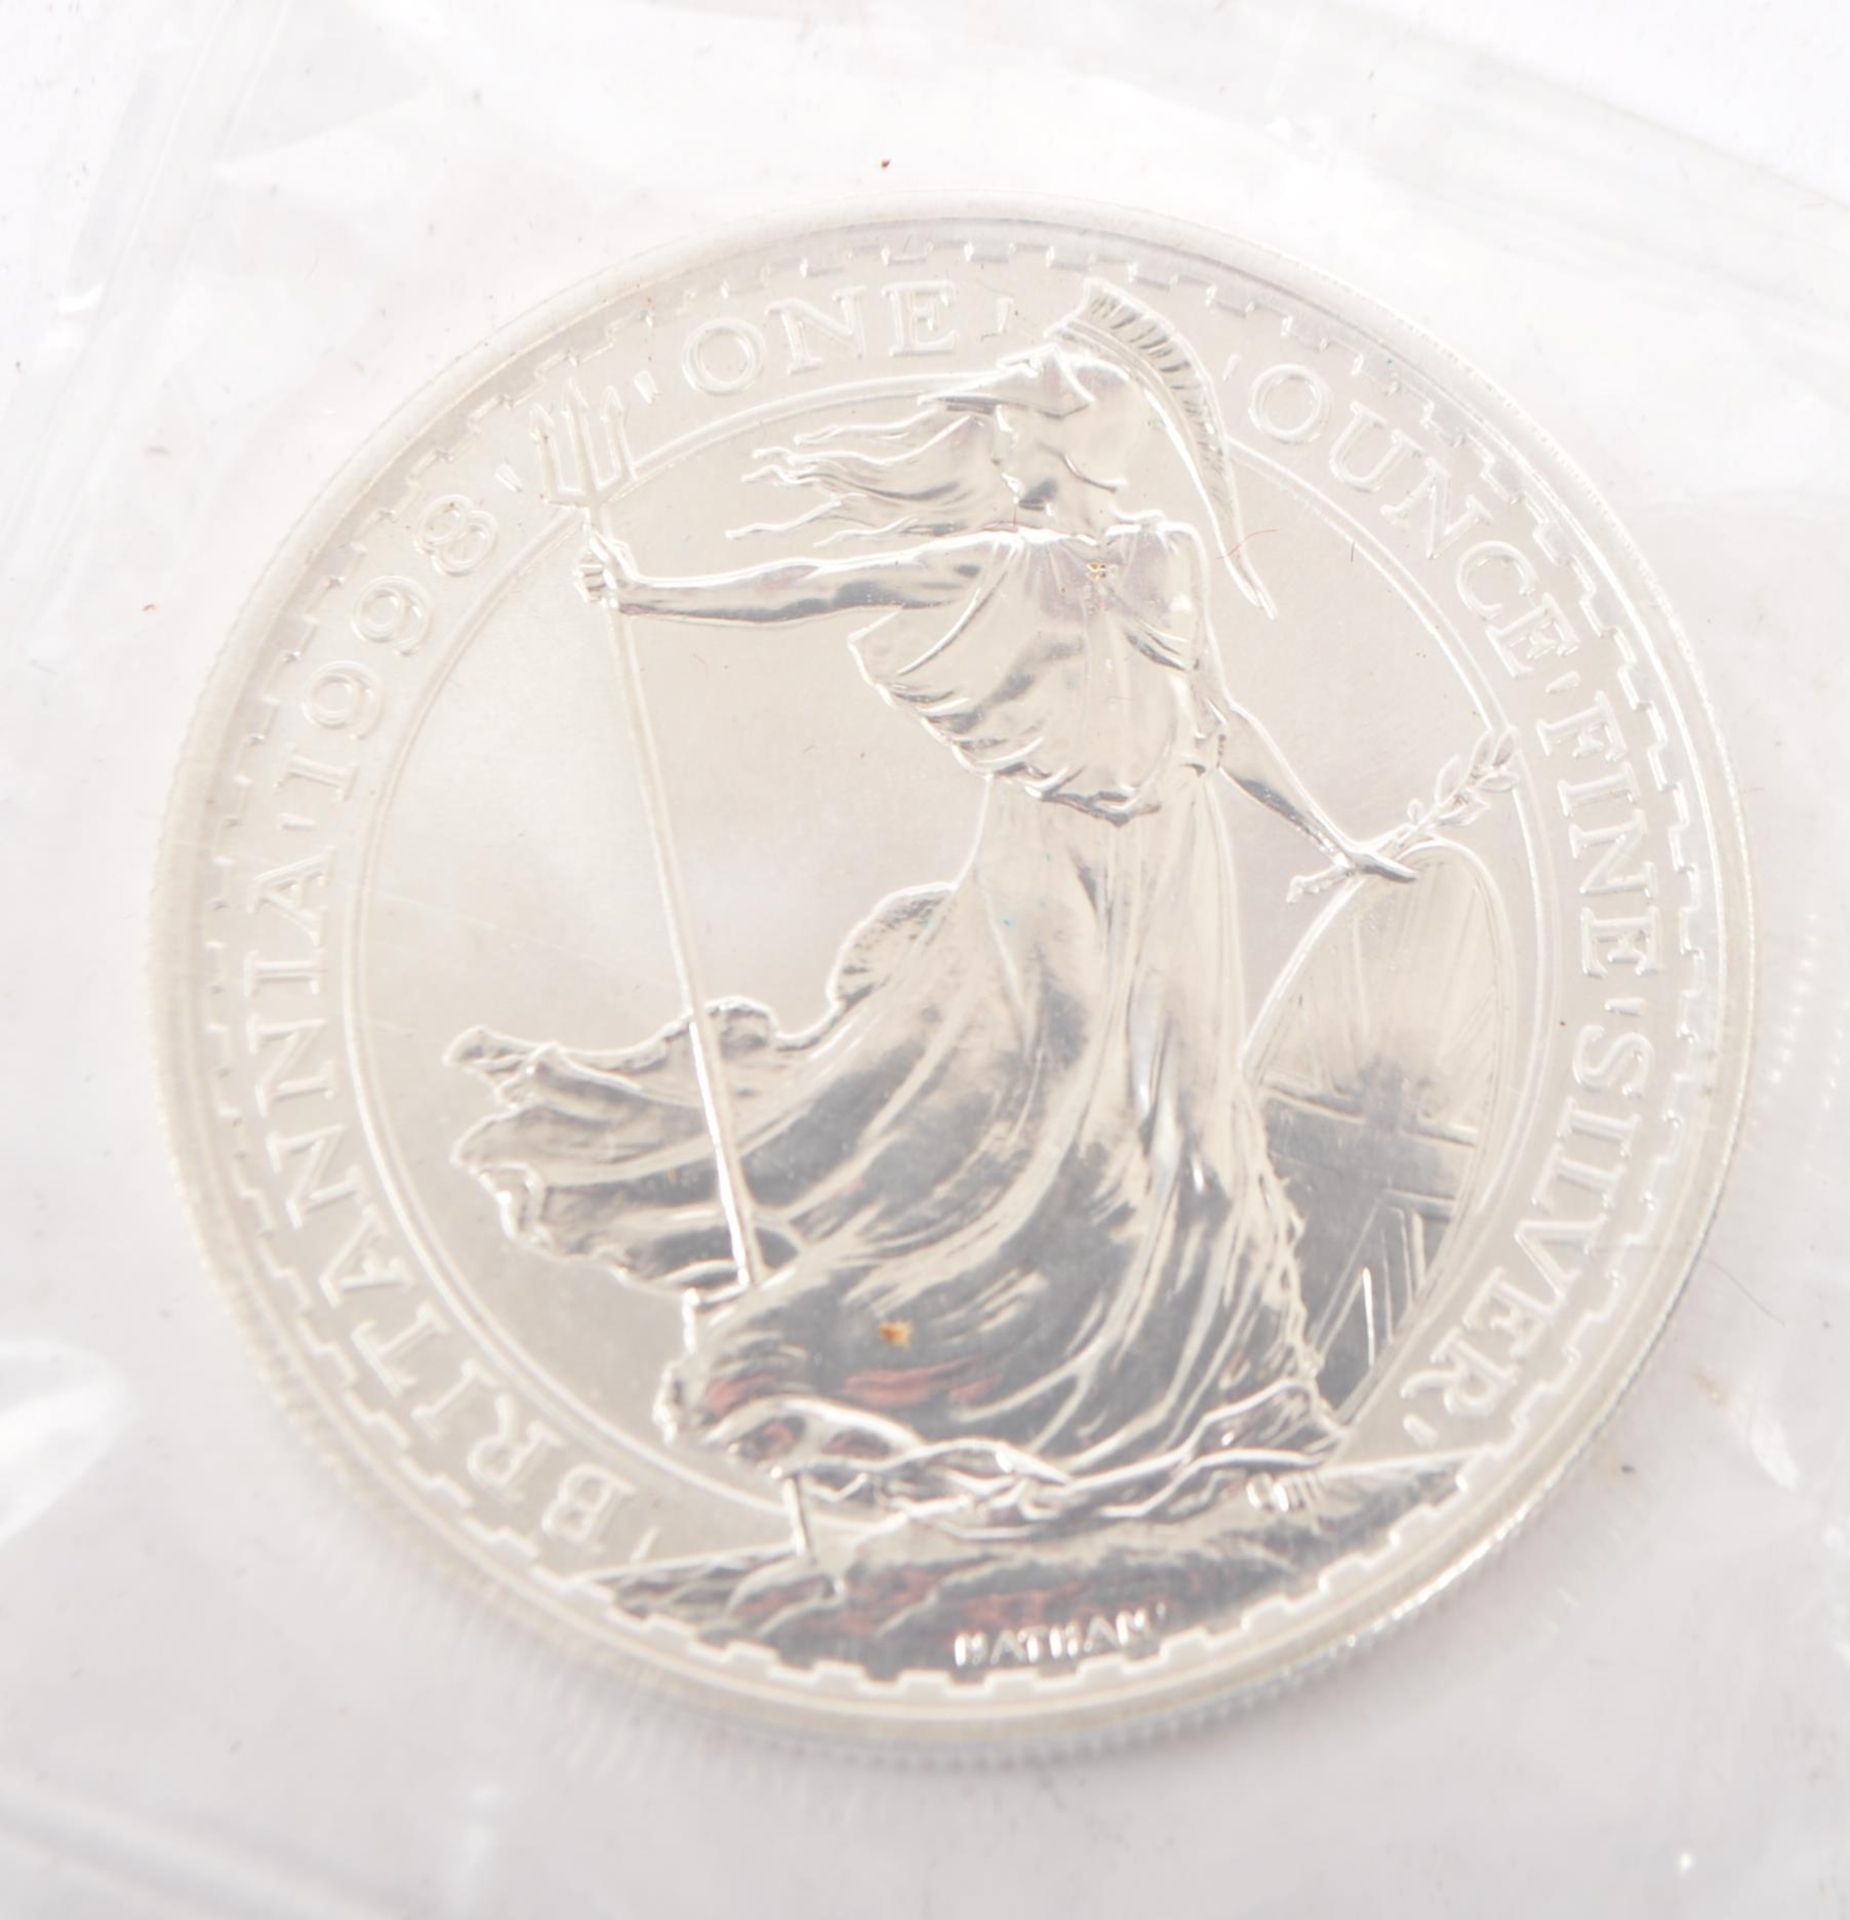 THREE SILVER PROOF COINS - TWO POUND - PIEDFORT - Image 6 of 7